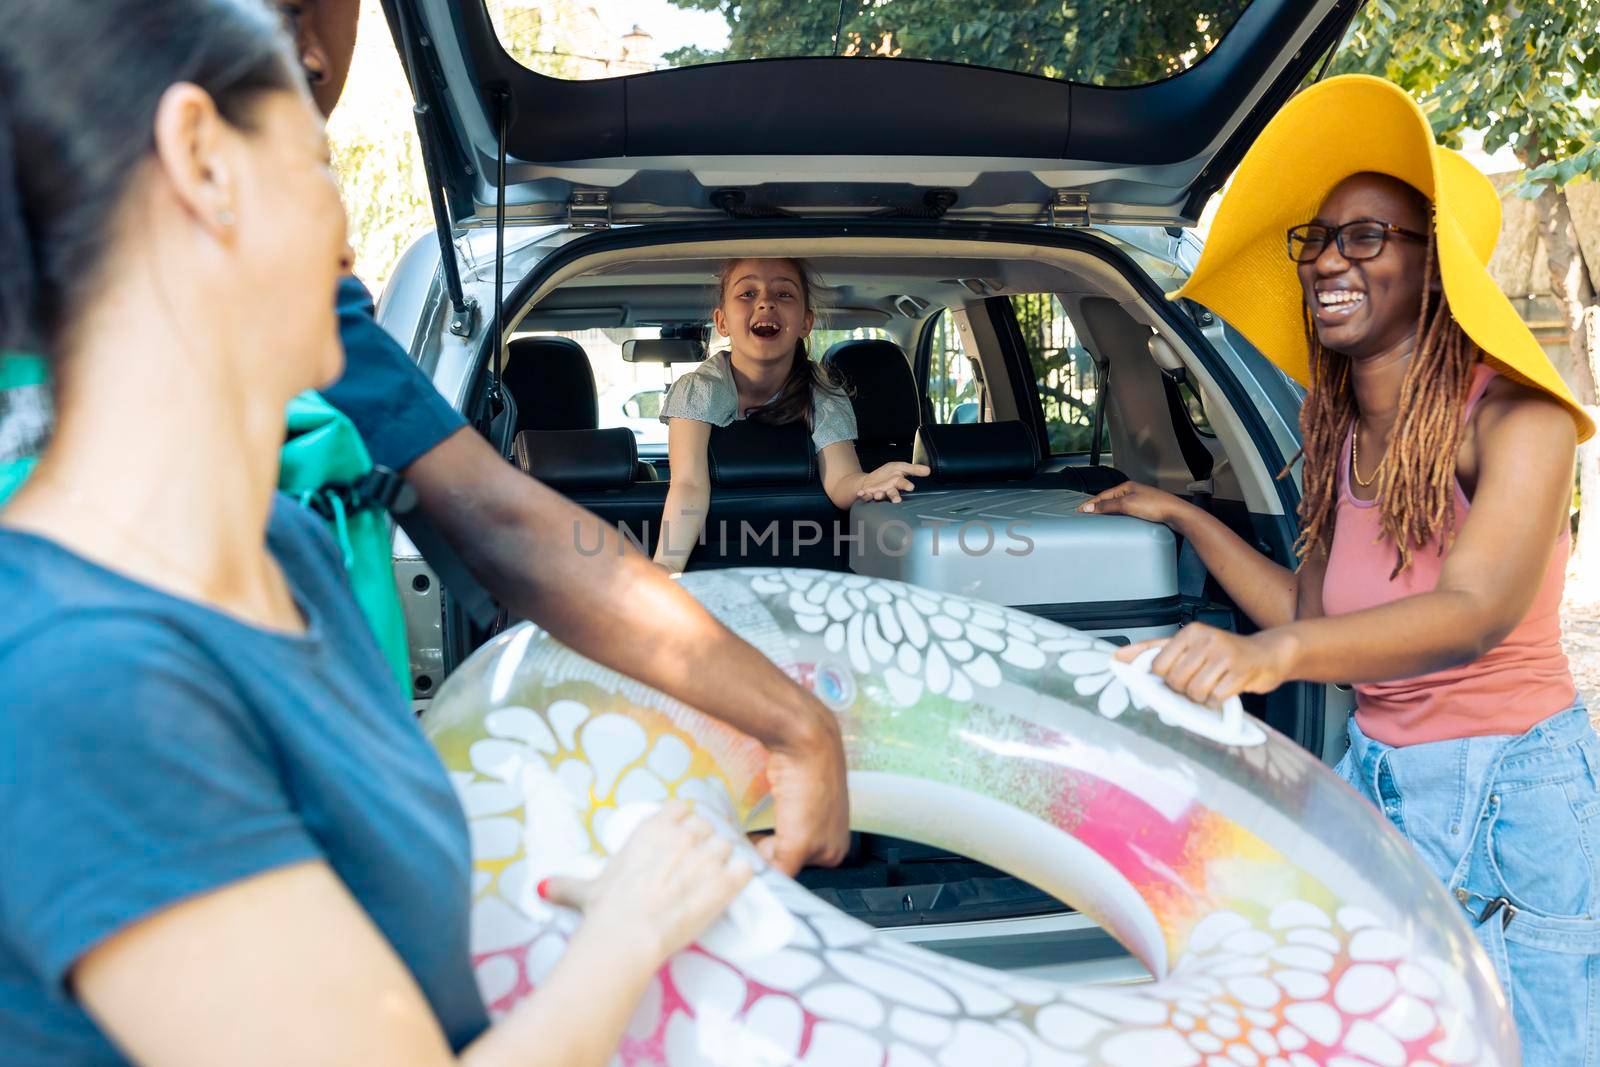 Multiethnic family and friends loading bags in car, preparing baggage in automobile. Travelling to seaside with diverse people, putting luggage and inflatable in vehicle, leaving on vacation.